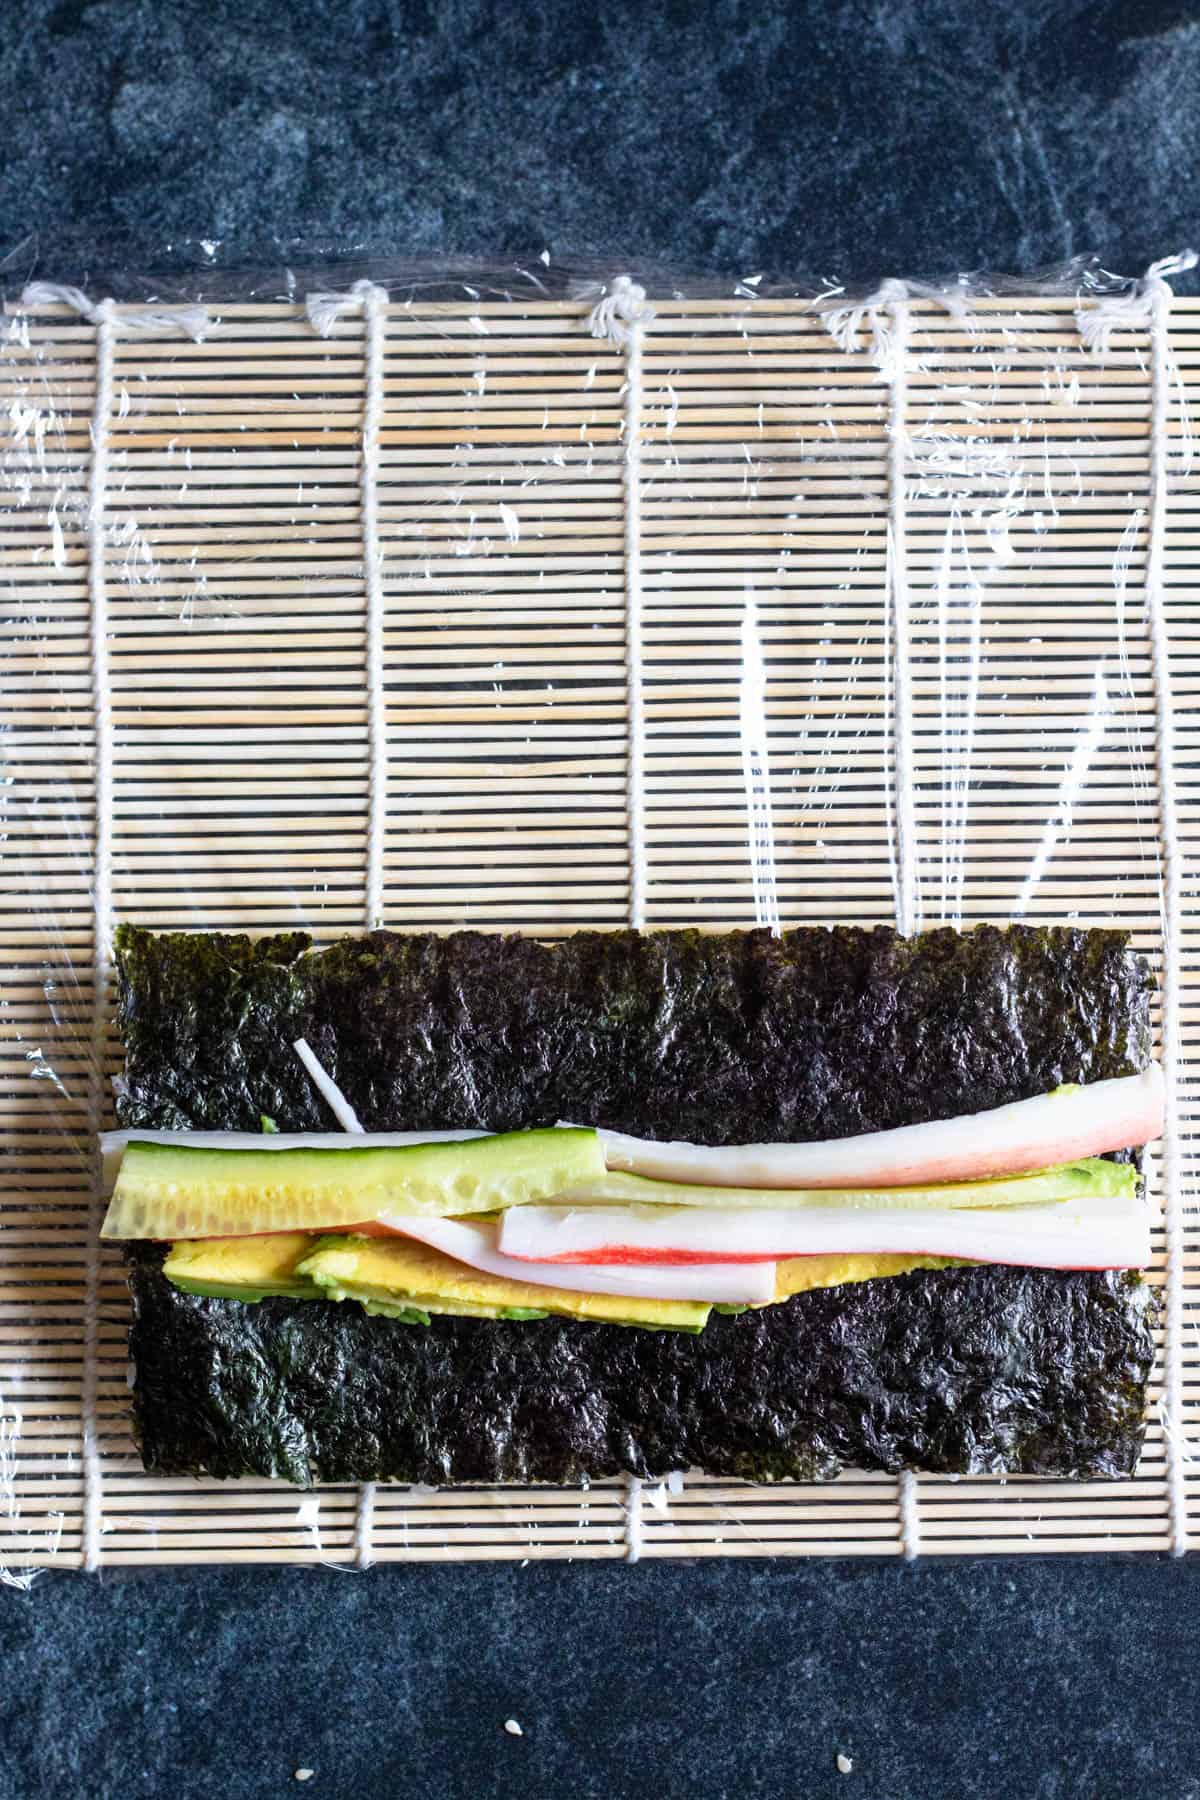 Nori sheet covering the sushi rice with thinly sliced cucumber, imitation crab and avocado slices. 